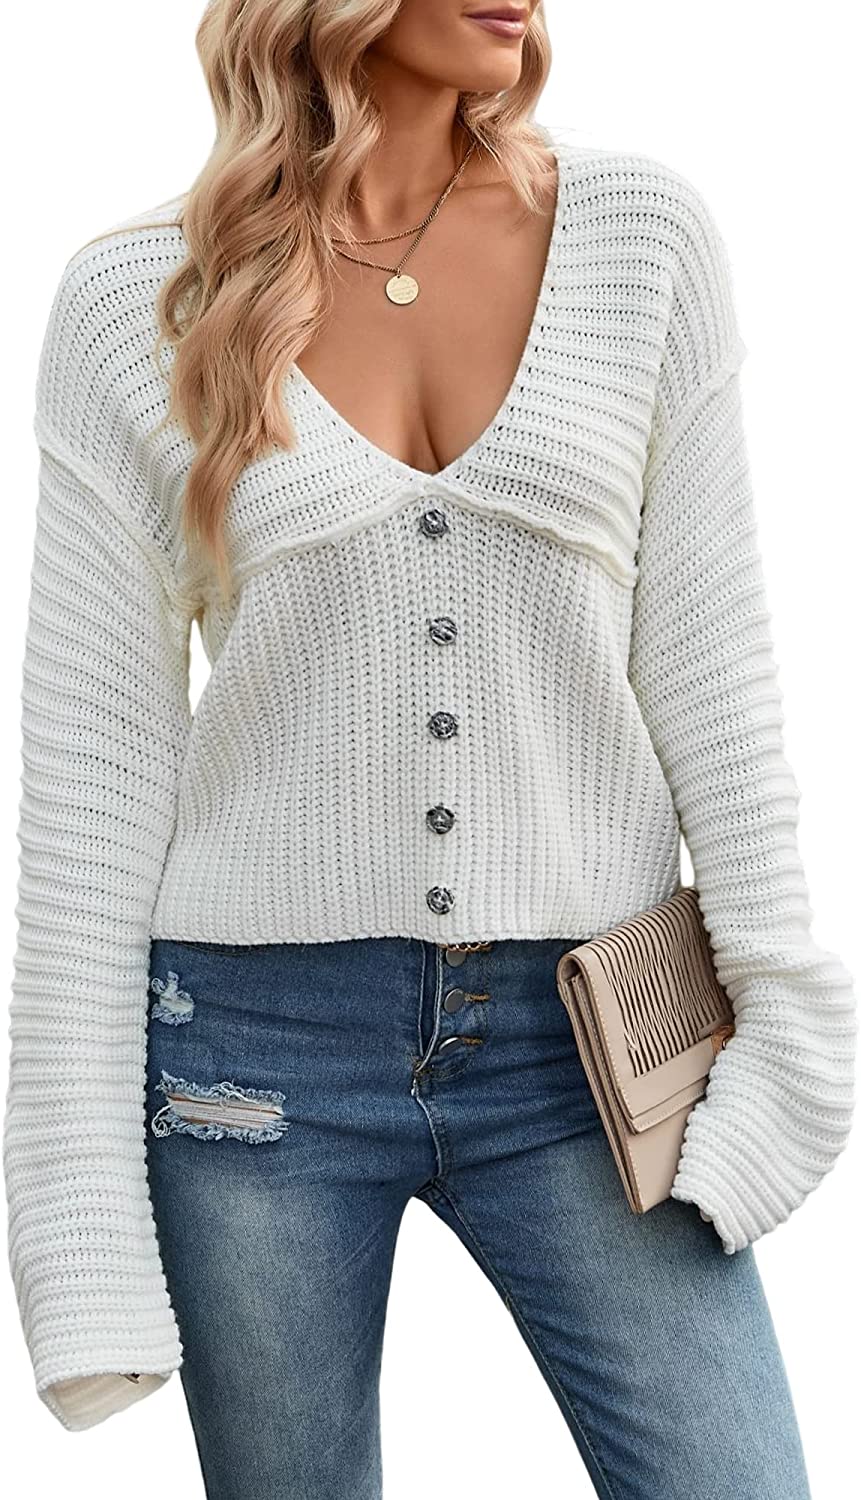 ZAFUL Women's Loose Long Sleeve V-Neck Ripped Pullover Knit Sweater  Crop Top | eBay